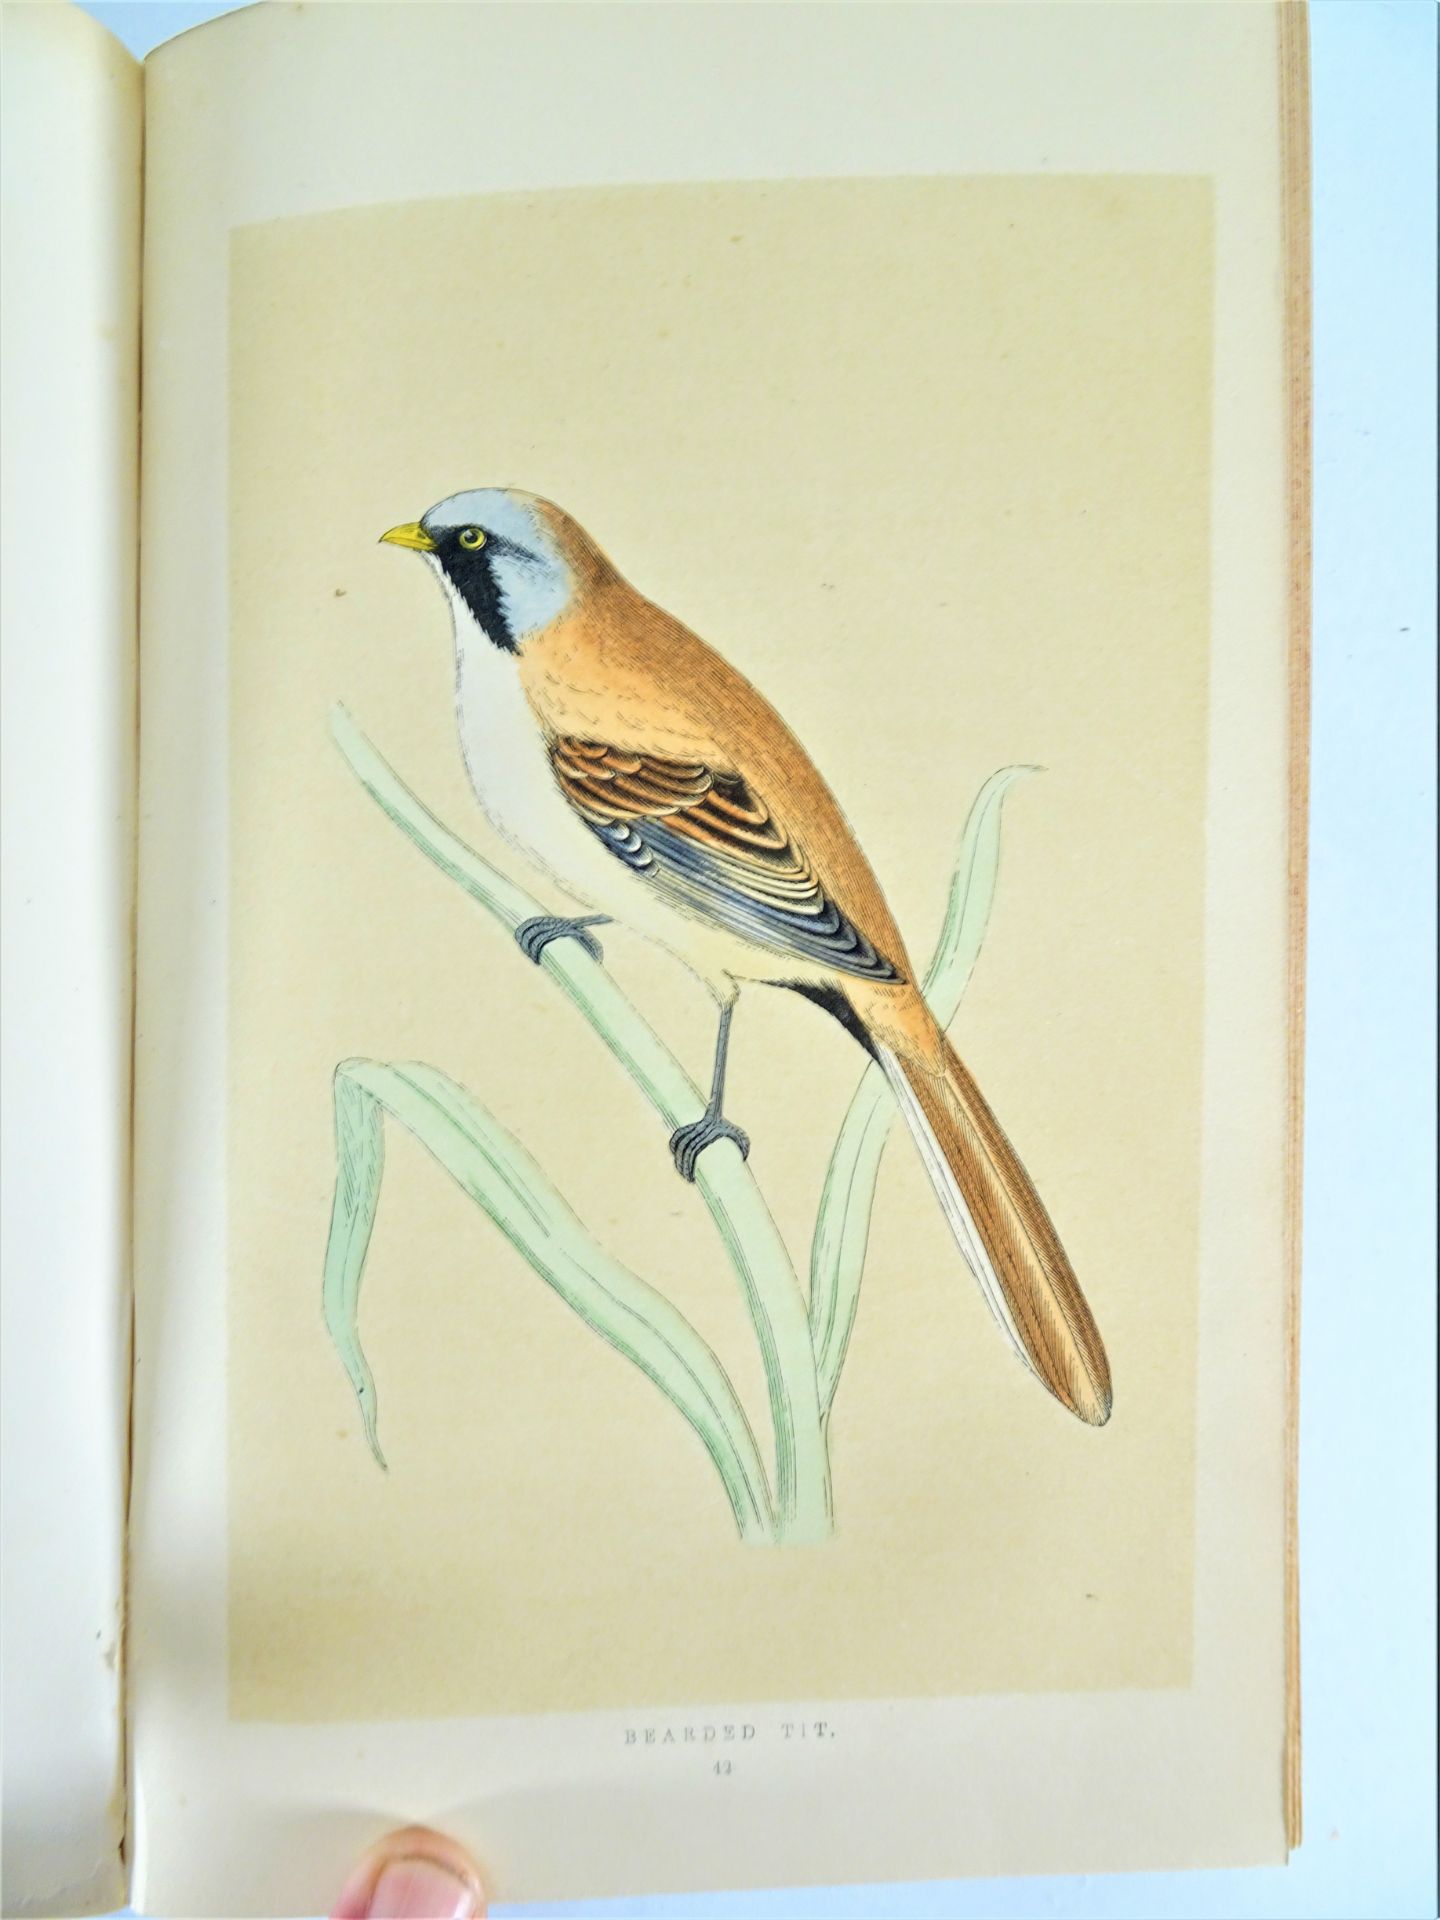 |Birds| Morris F.O., "A history of British birds", 1851-1857, first edition. London, Groombridge& - Image 7 of 12